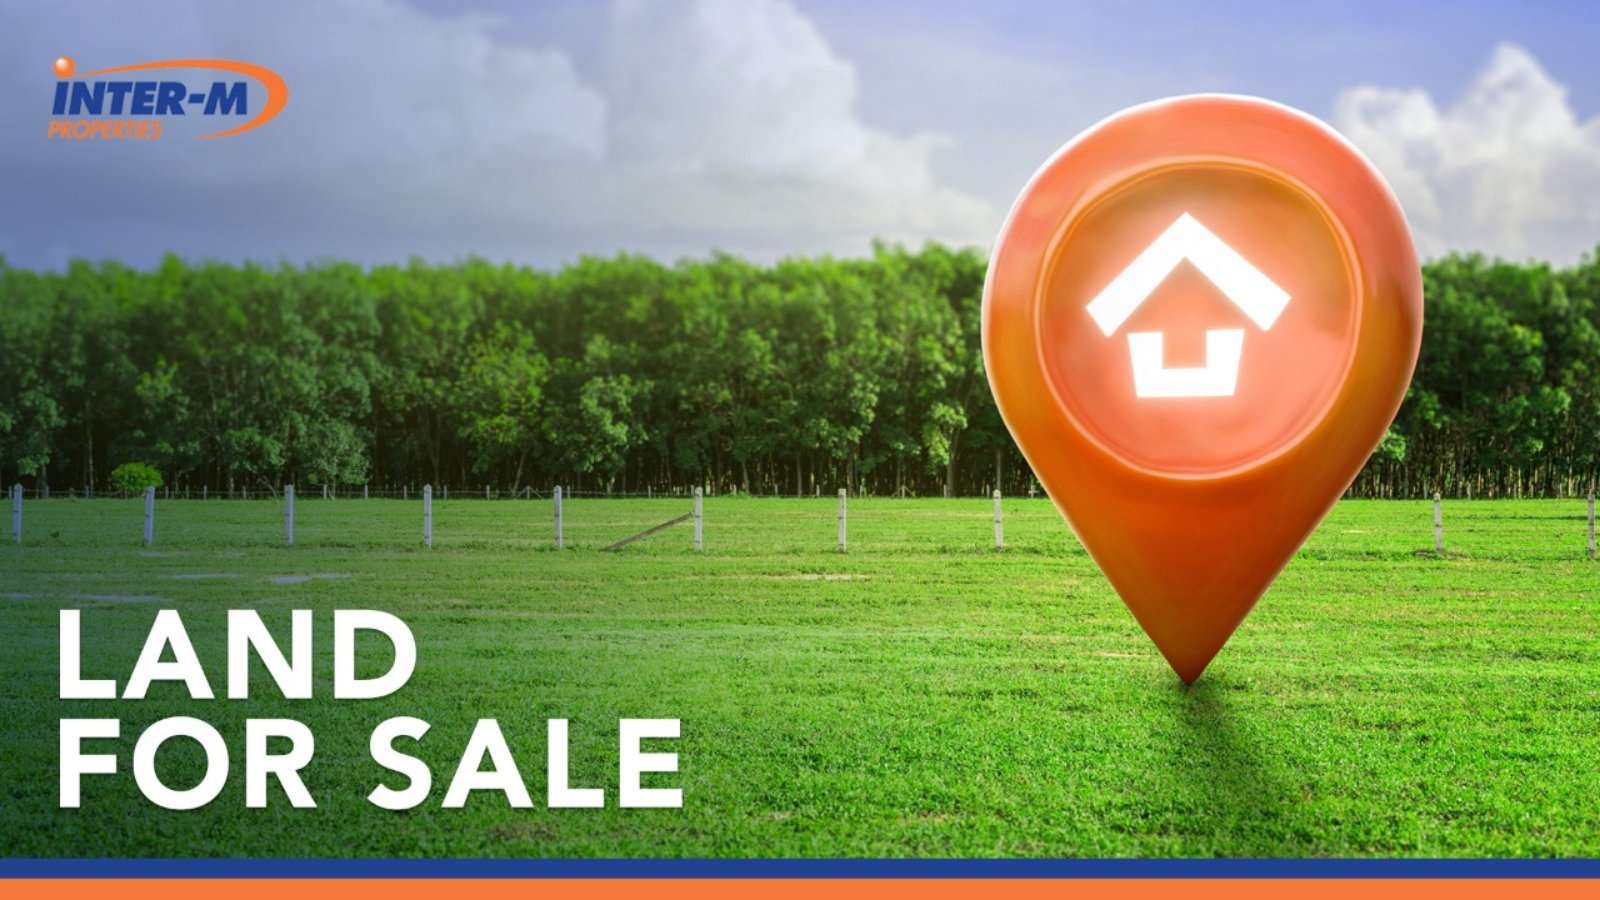 Residential Land For Sale In Ergates, Nicosia (1395 Sq.m)